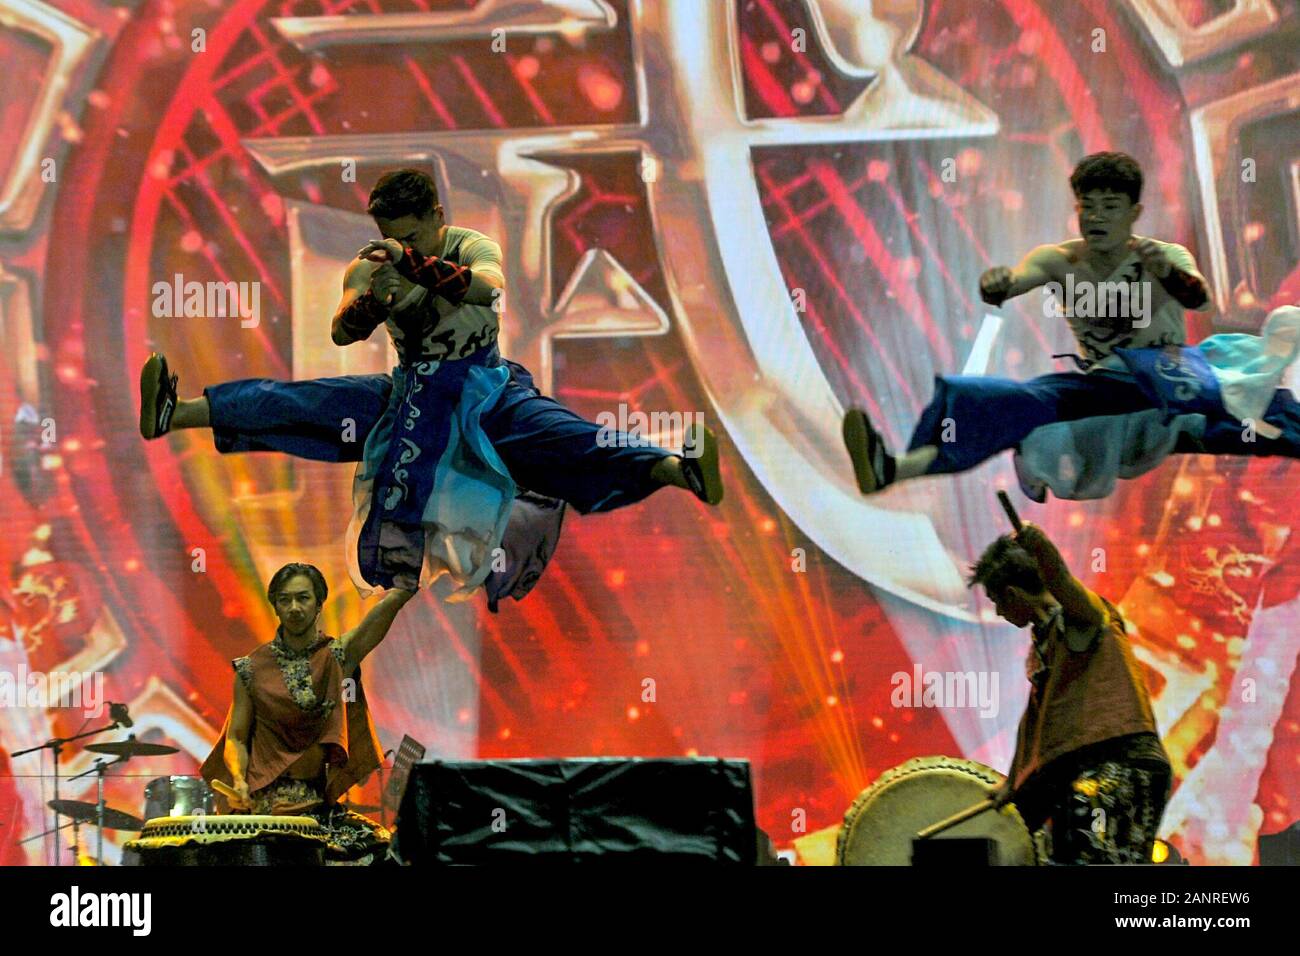 Kuala Lumpur, Malaysia. 19th Jan, 2020. People perform during a Chinese Spring Festival celebrations in Kuala Lumpur, Malaysia, Jan. 18, 2020. Credit: Xinhua/Alamy Live News Stock Photo